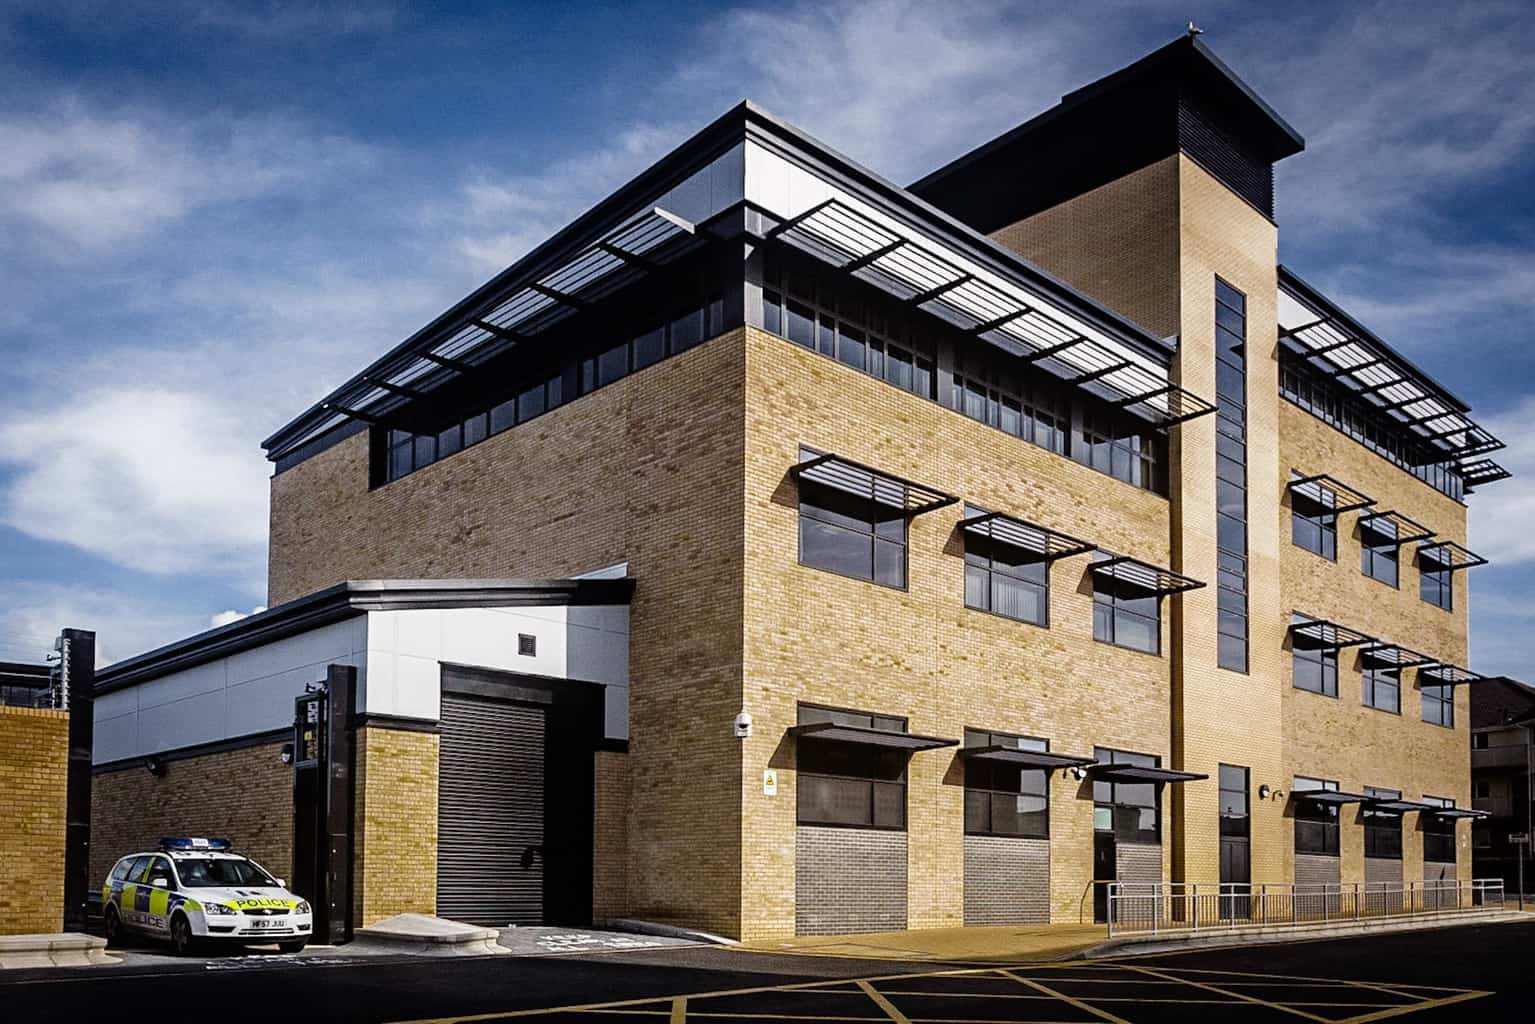  Poole Police Station by Rick McEvoy Architectural Photographer in Poole 